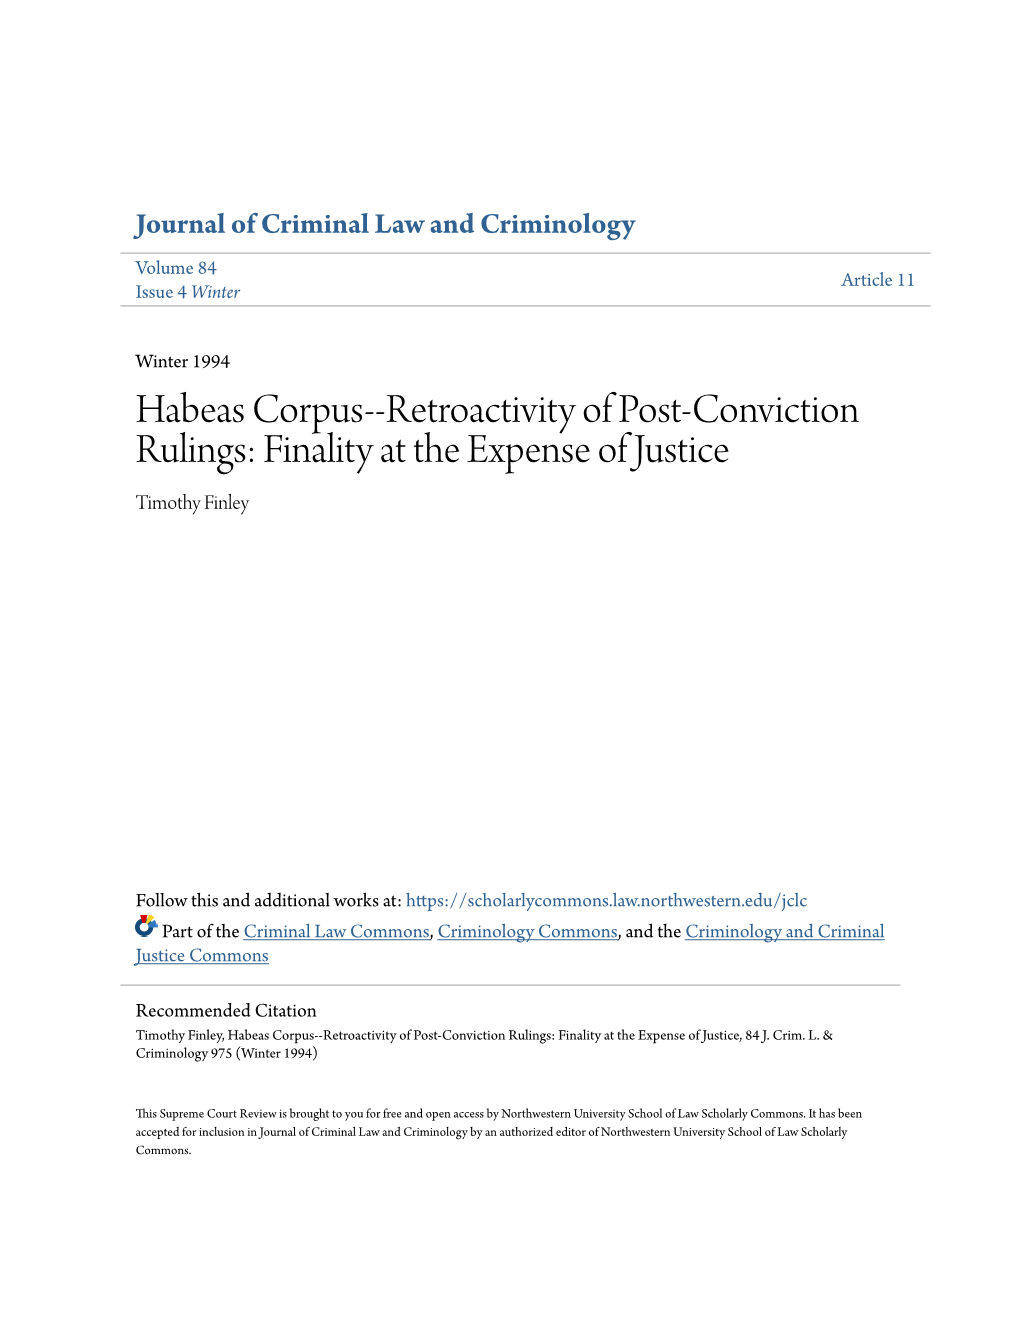 Habeas Corpus--Retroactivity of Post-Conviction Rulings: Finality at the Expense of Justice Timothy Finley